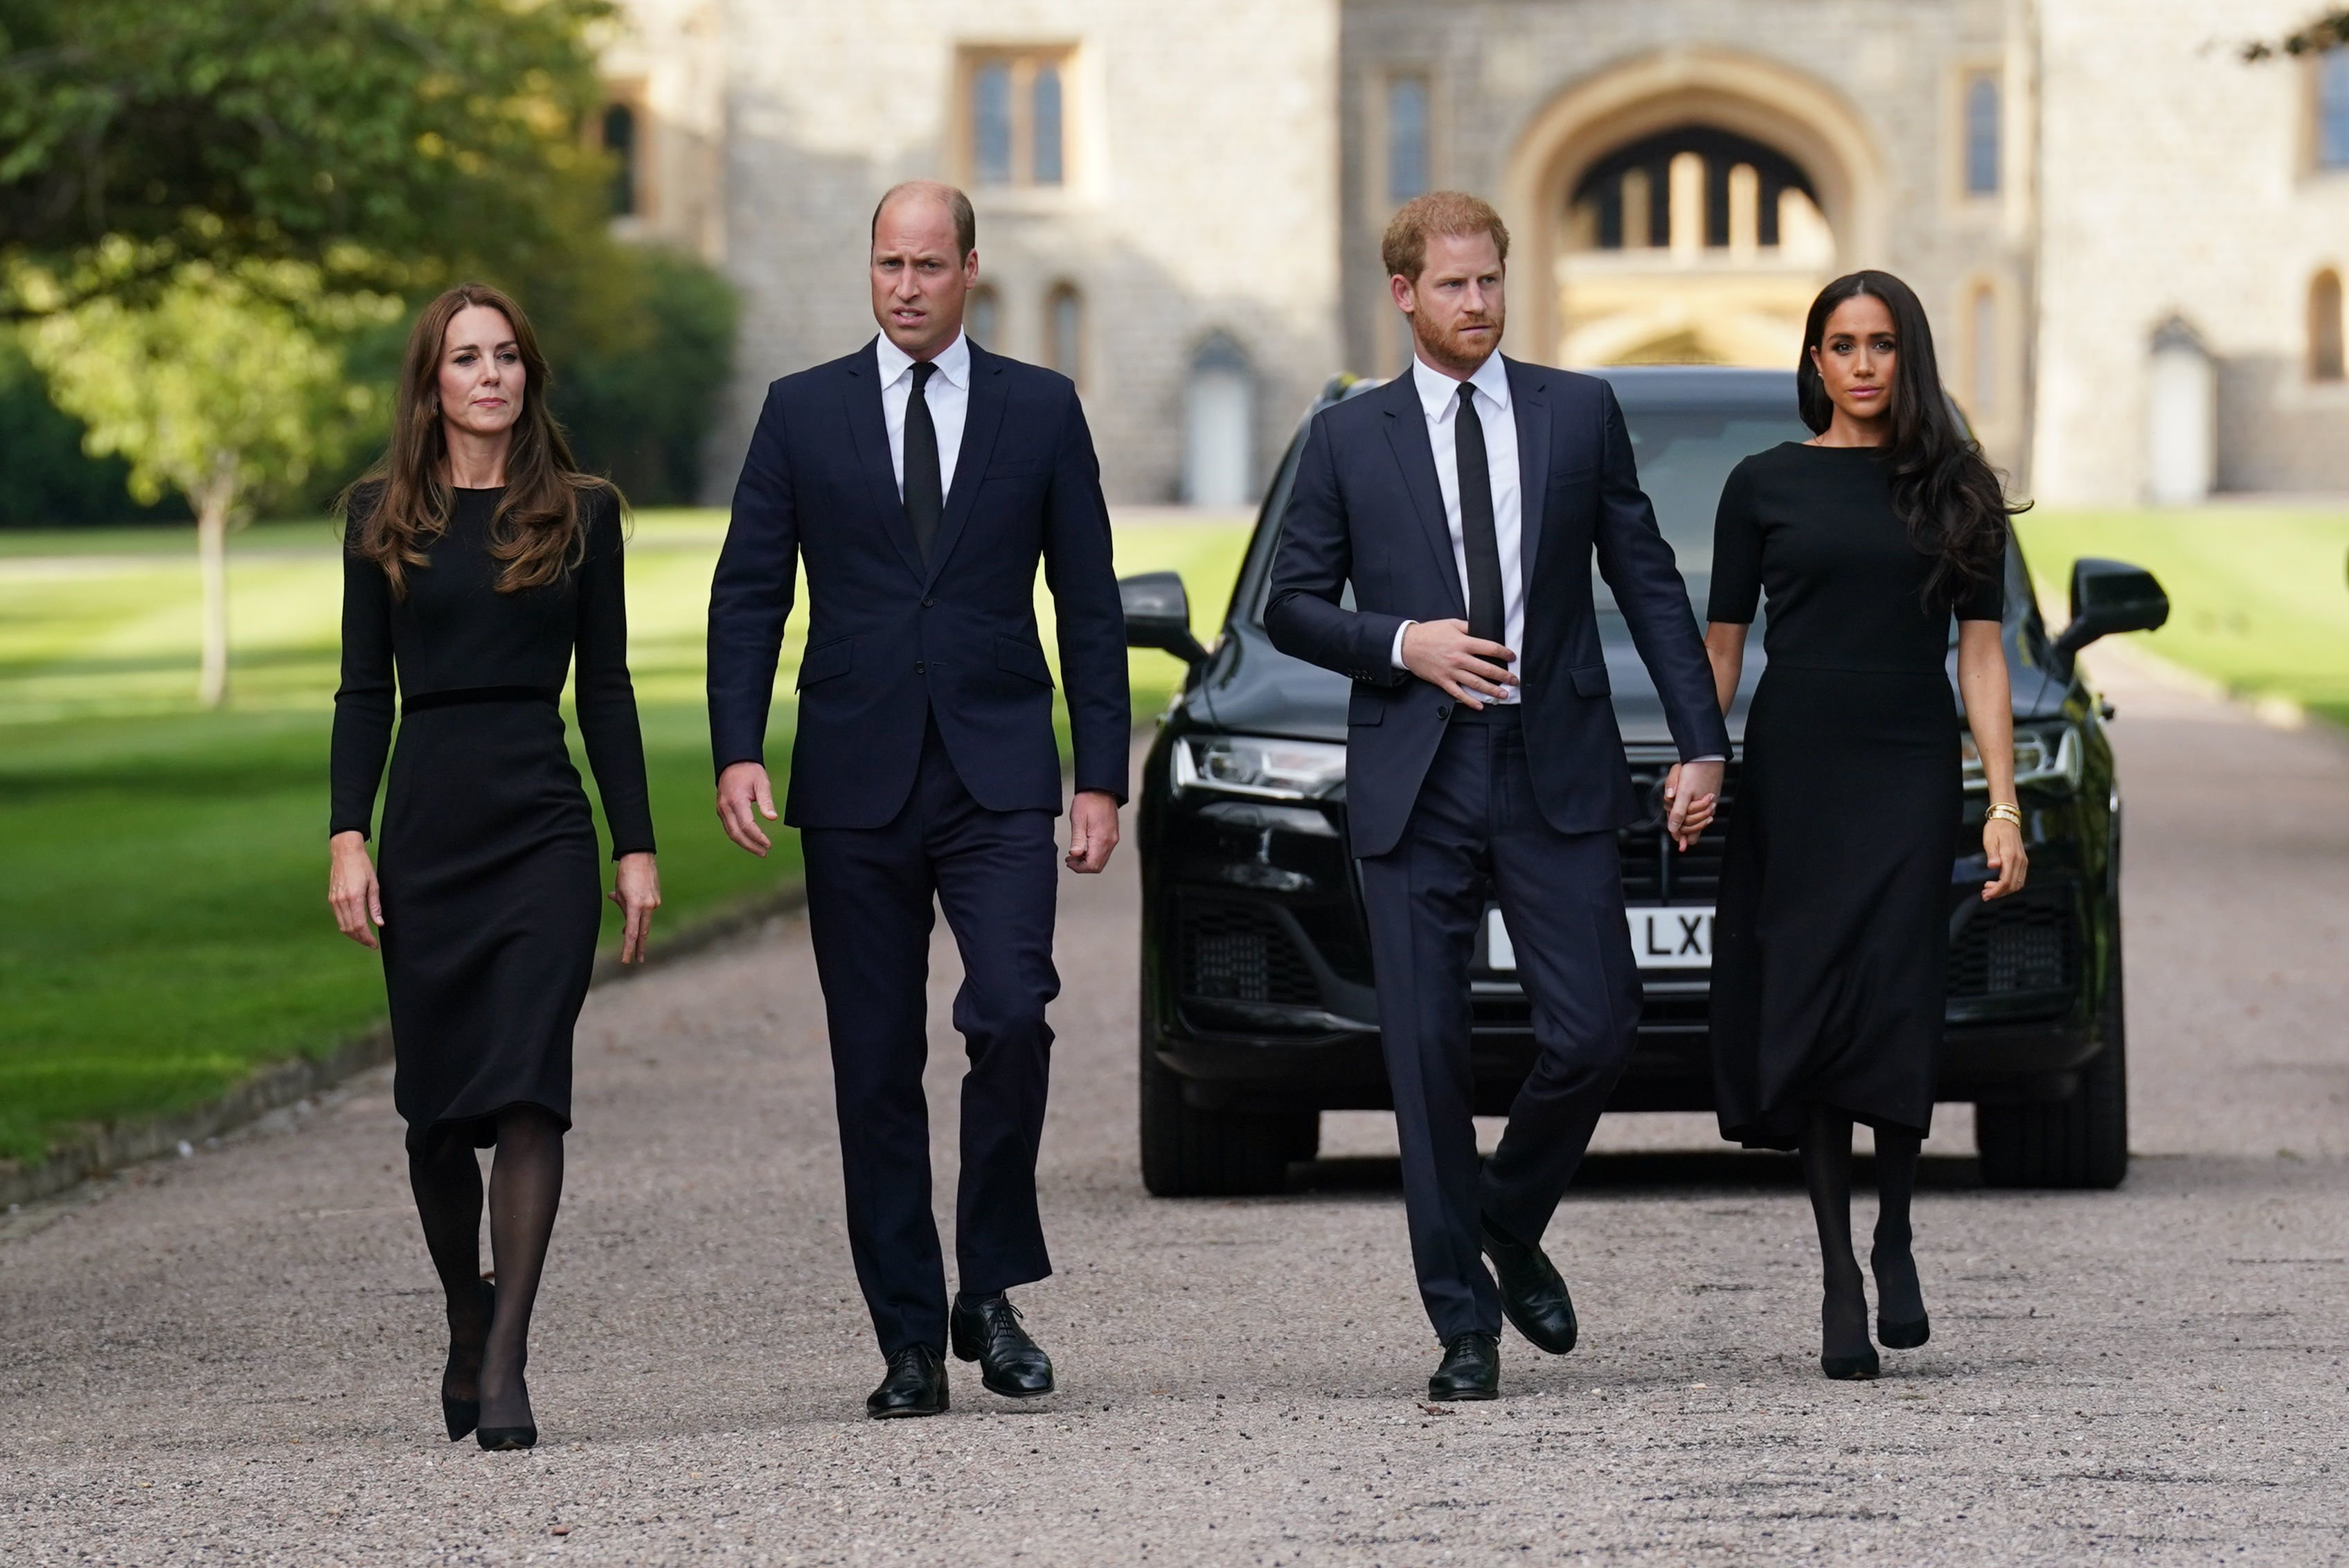 Kate Middleton, Prince William, Prince Harry, and Meghan Markle walk to view tributes left at the gates of Windsor Castle to Queen Elizabeth II